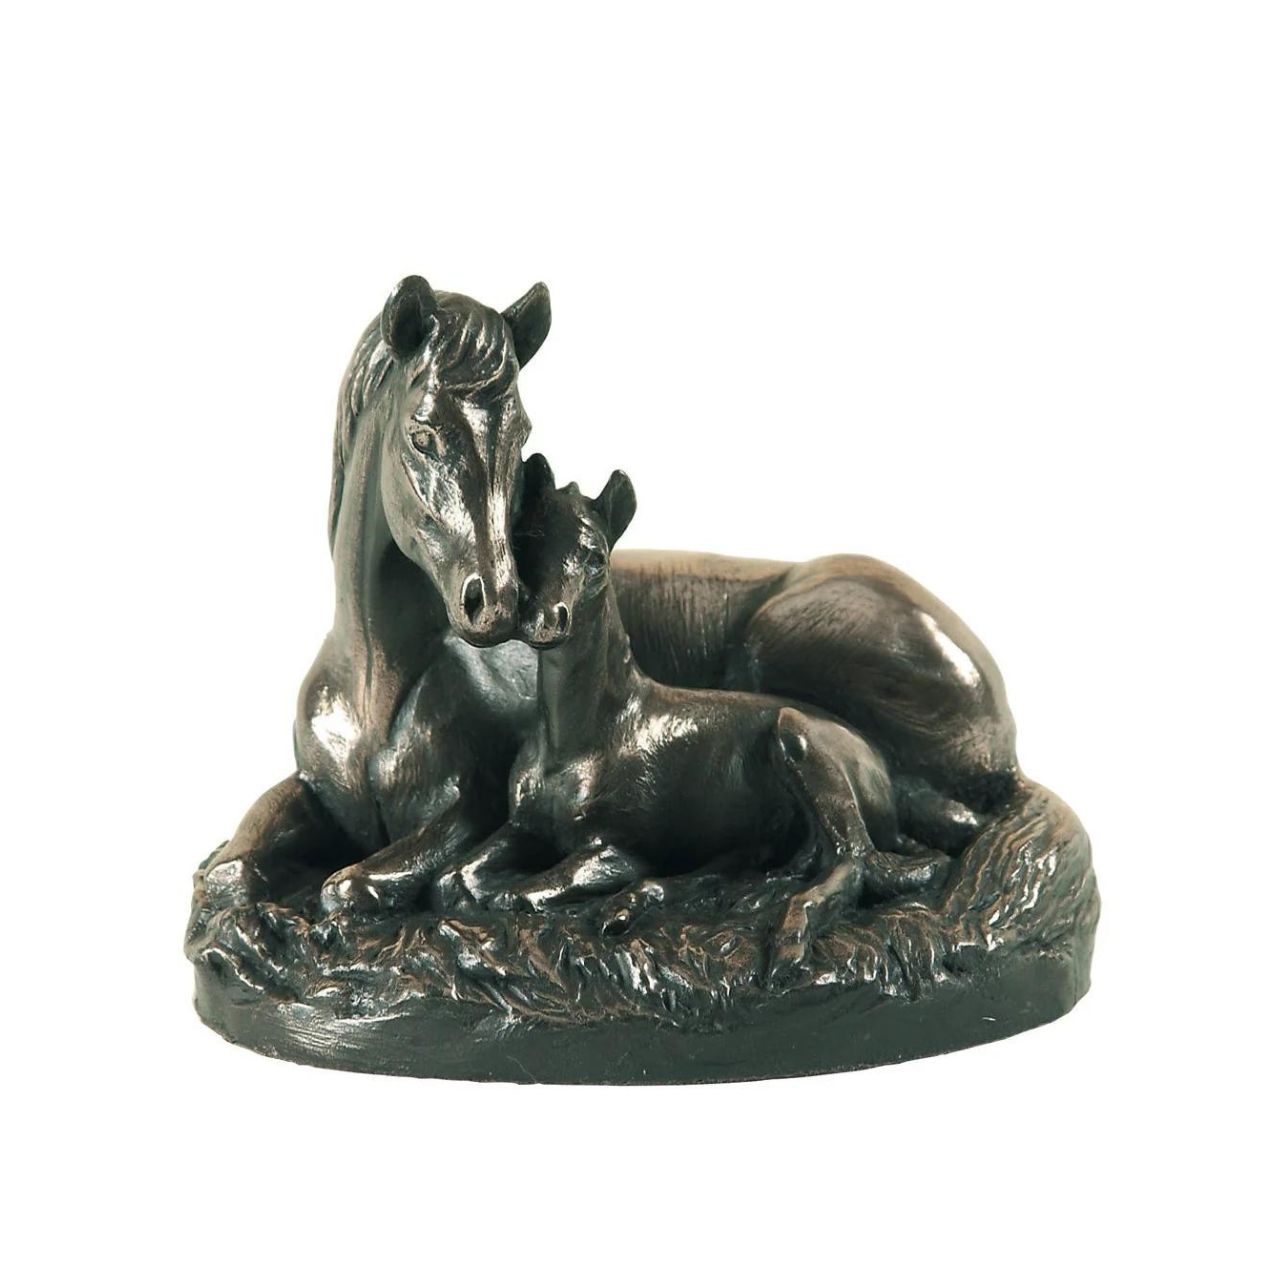 Pony and foal is one of the most popular pieces in the Genesis Collection ideal for a gift or presentation.